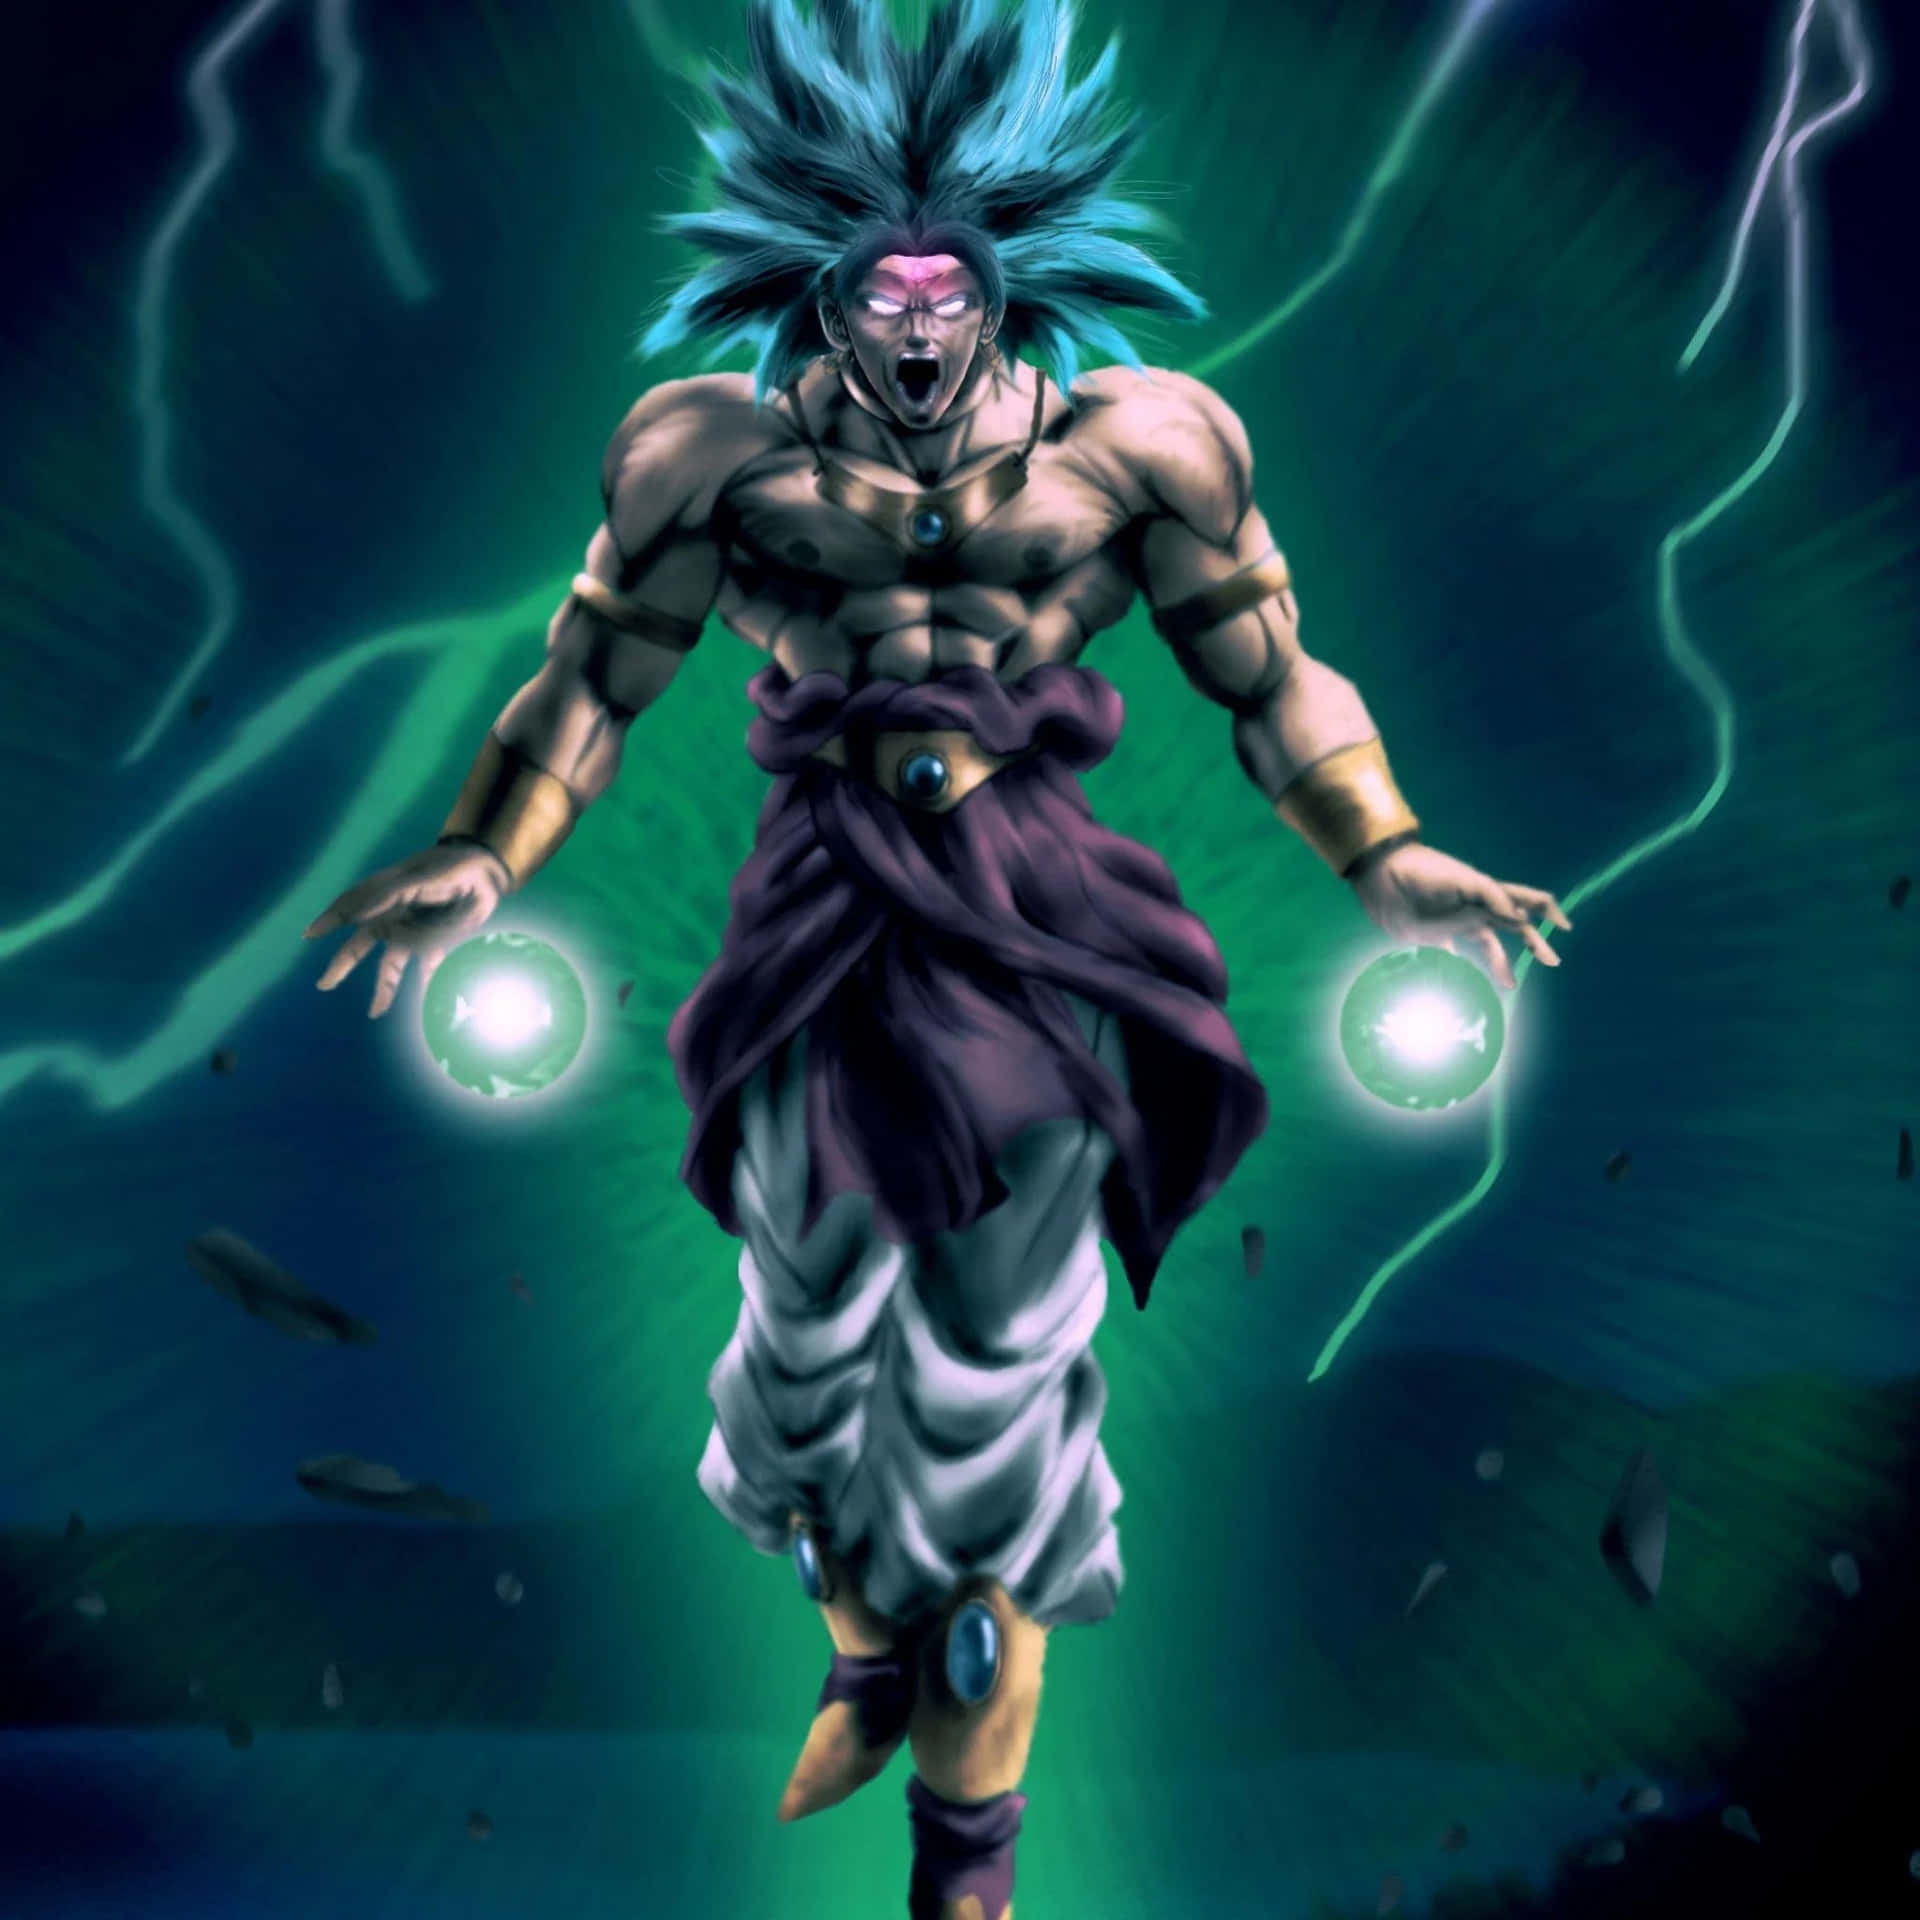 "From the legendary movie Dragon Ball Super Broly, a glimpse of Super Saiyan Blue Goku mid-battle."